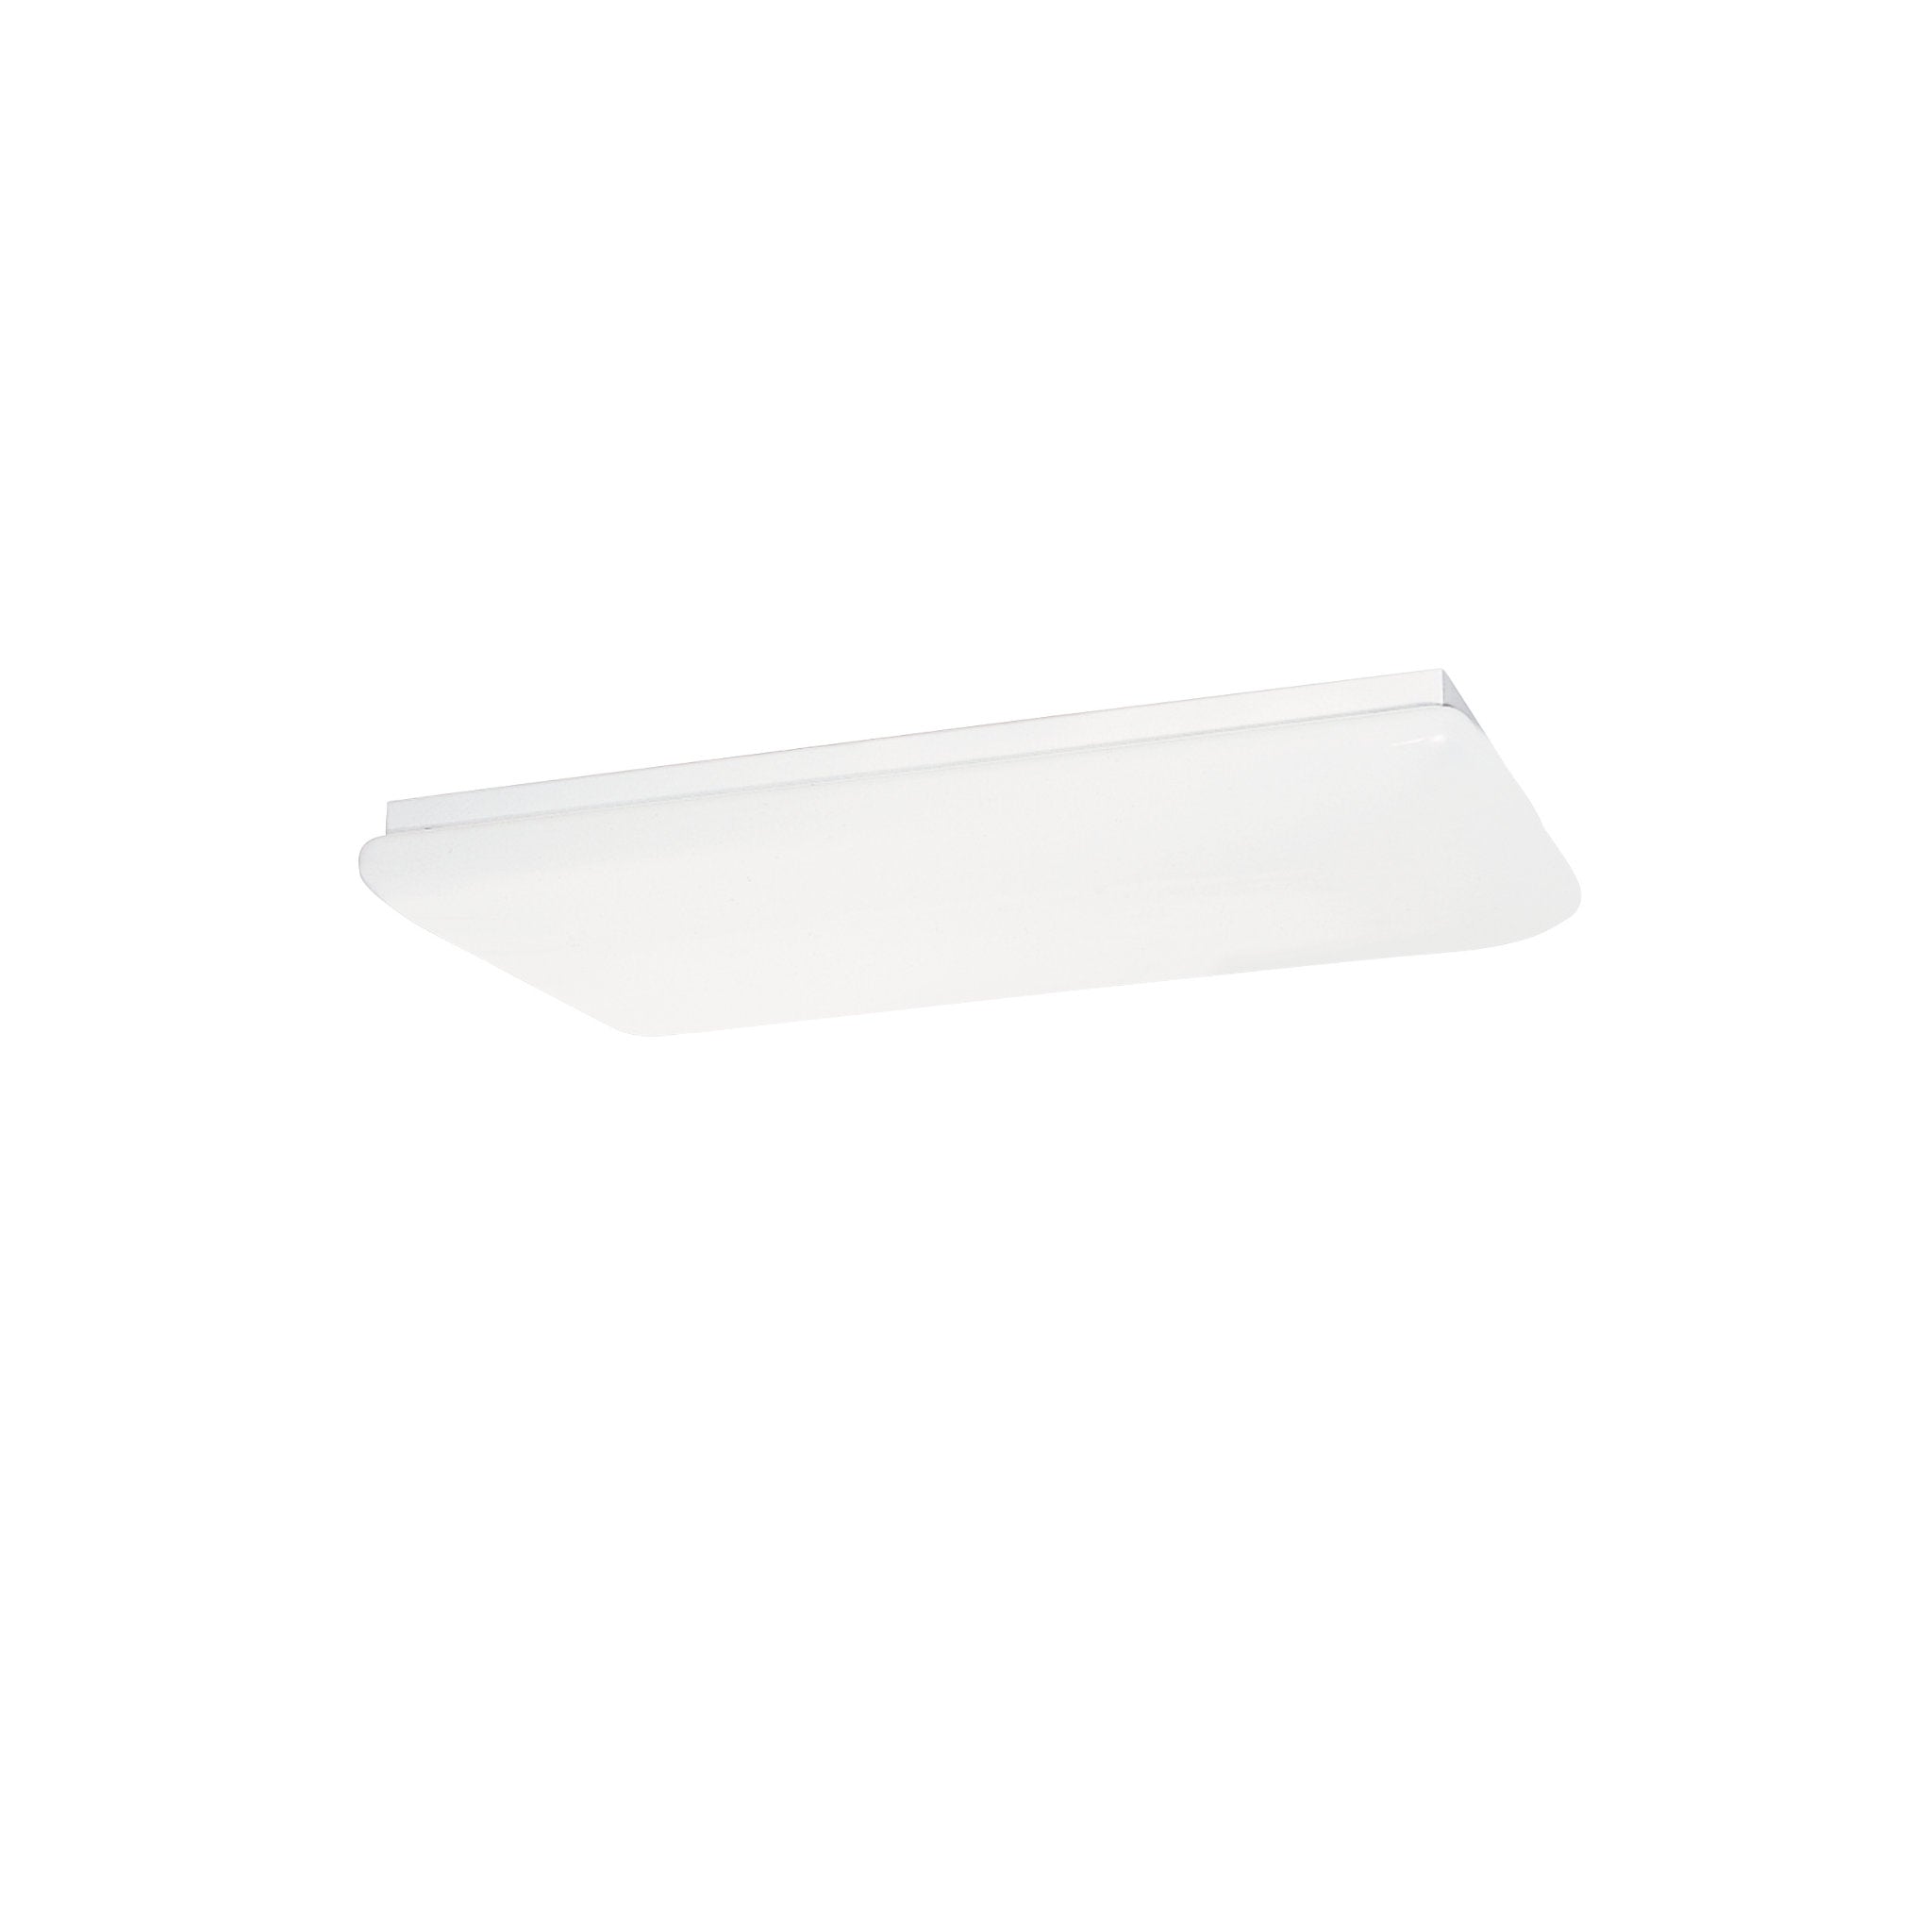 Four Light Ceiling Flush Mount Traditional Fixture 16.75" Width 5.75" Height Steel White Shade in